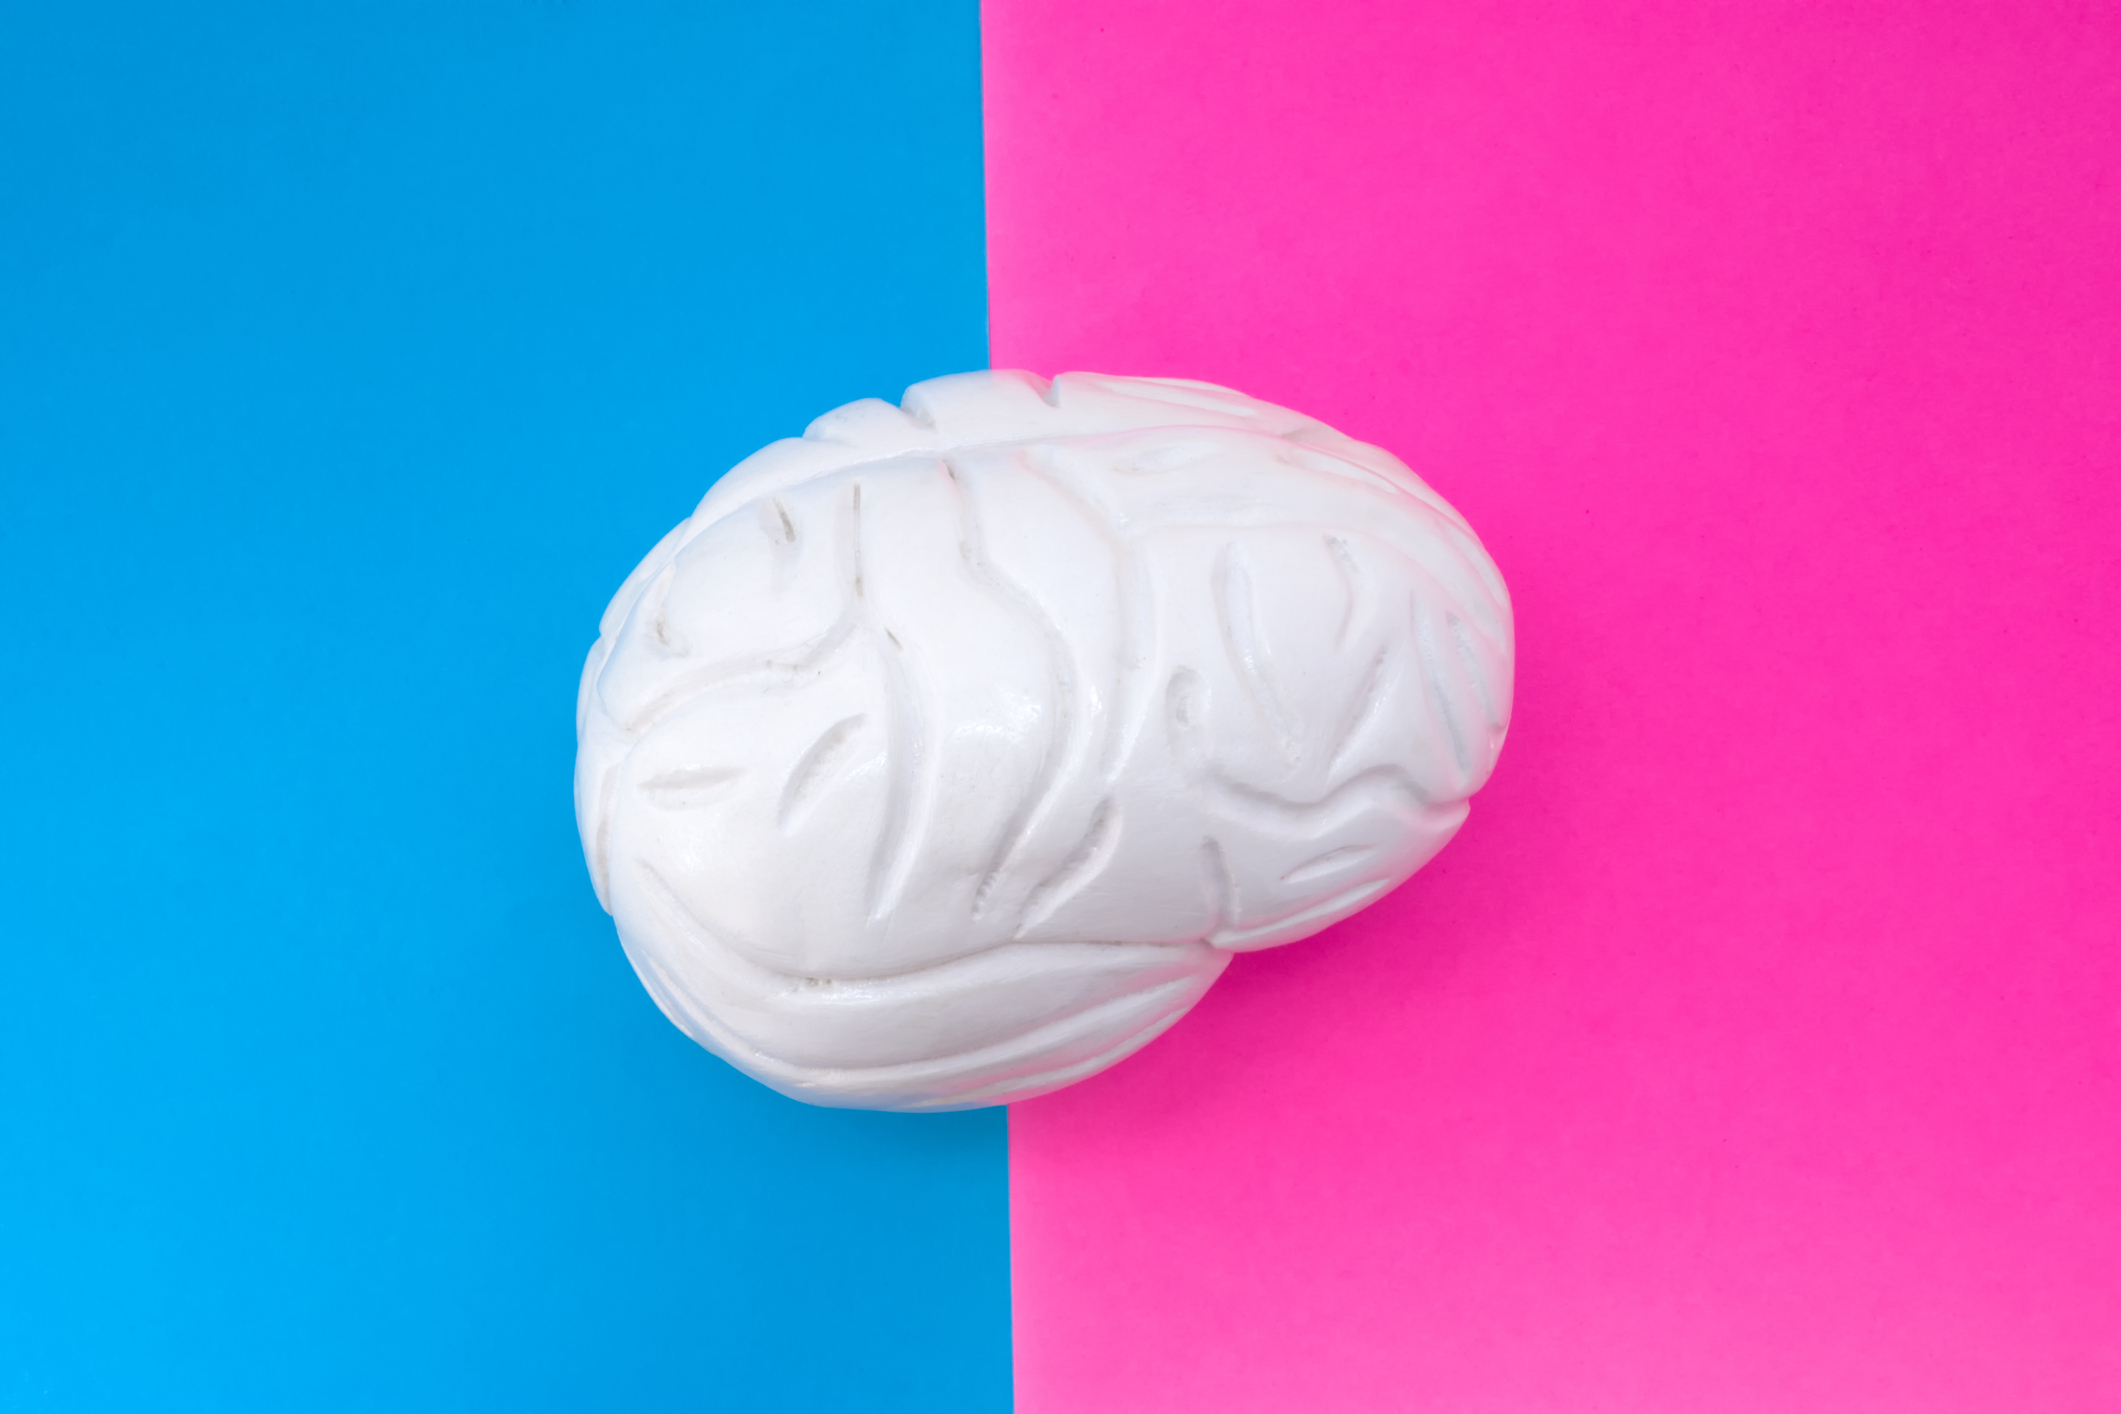 Anatomical shape of brain is located in middle of frame, divided by half by pink and blue background. Concept of gender features of brain or mental health in men and women, functions and structure